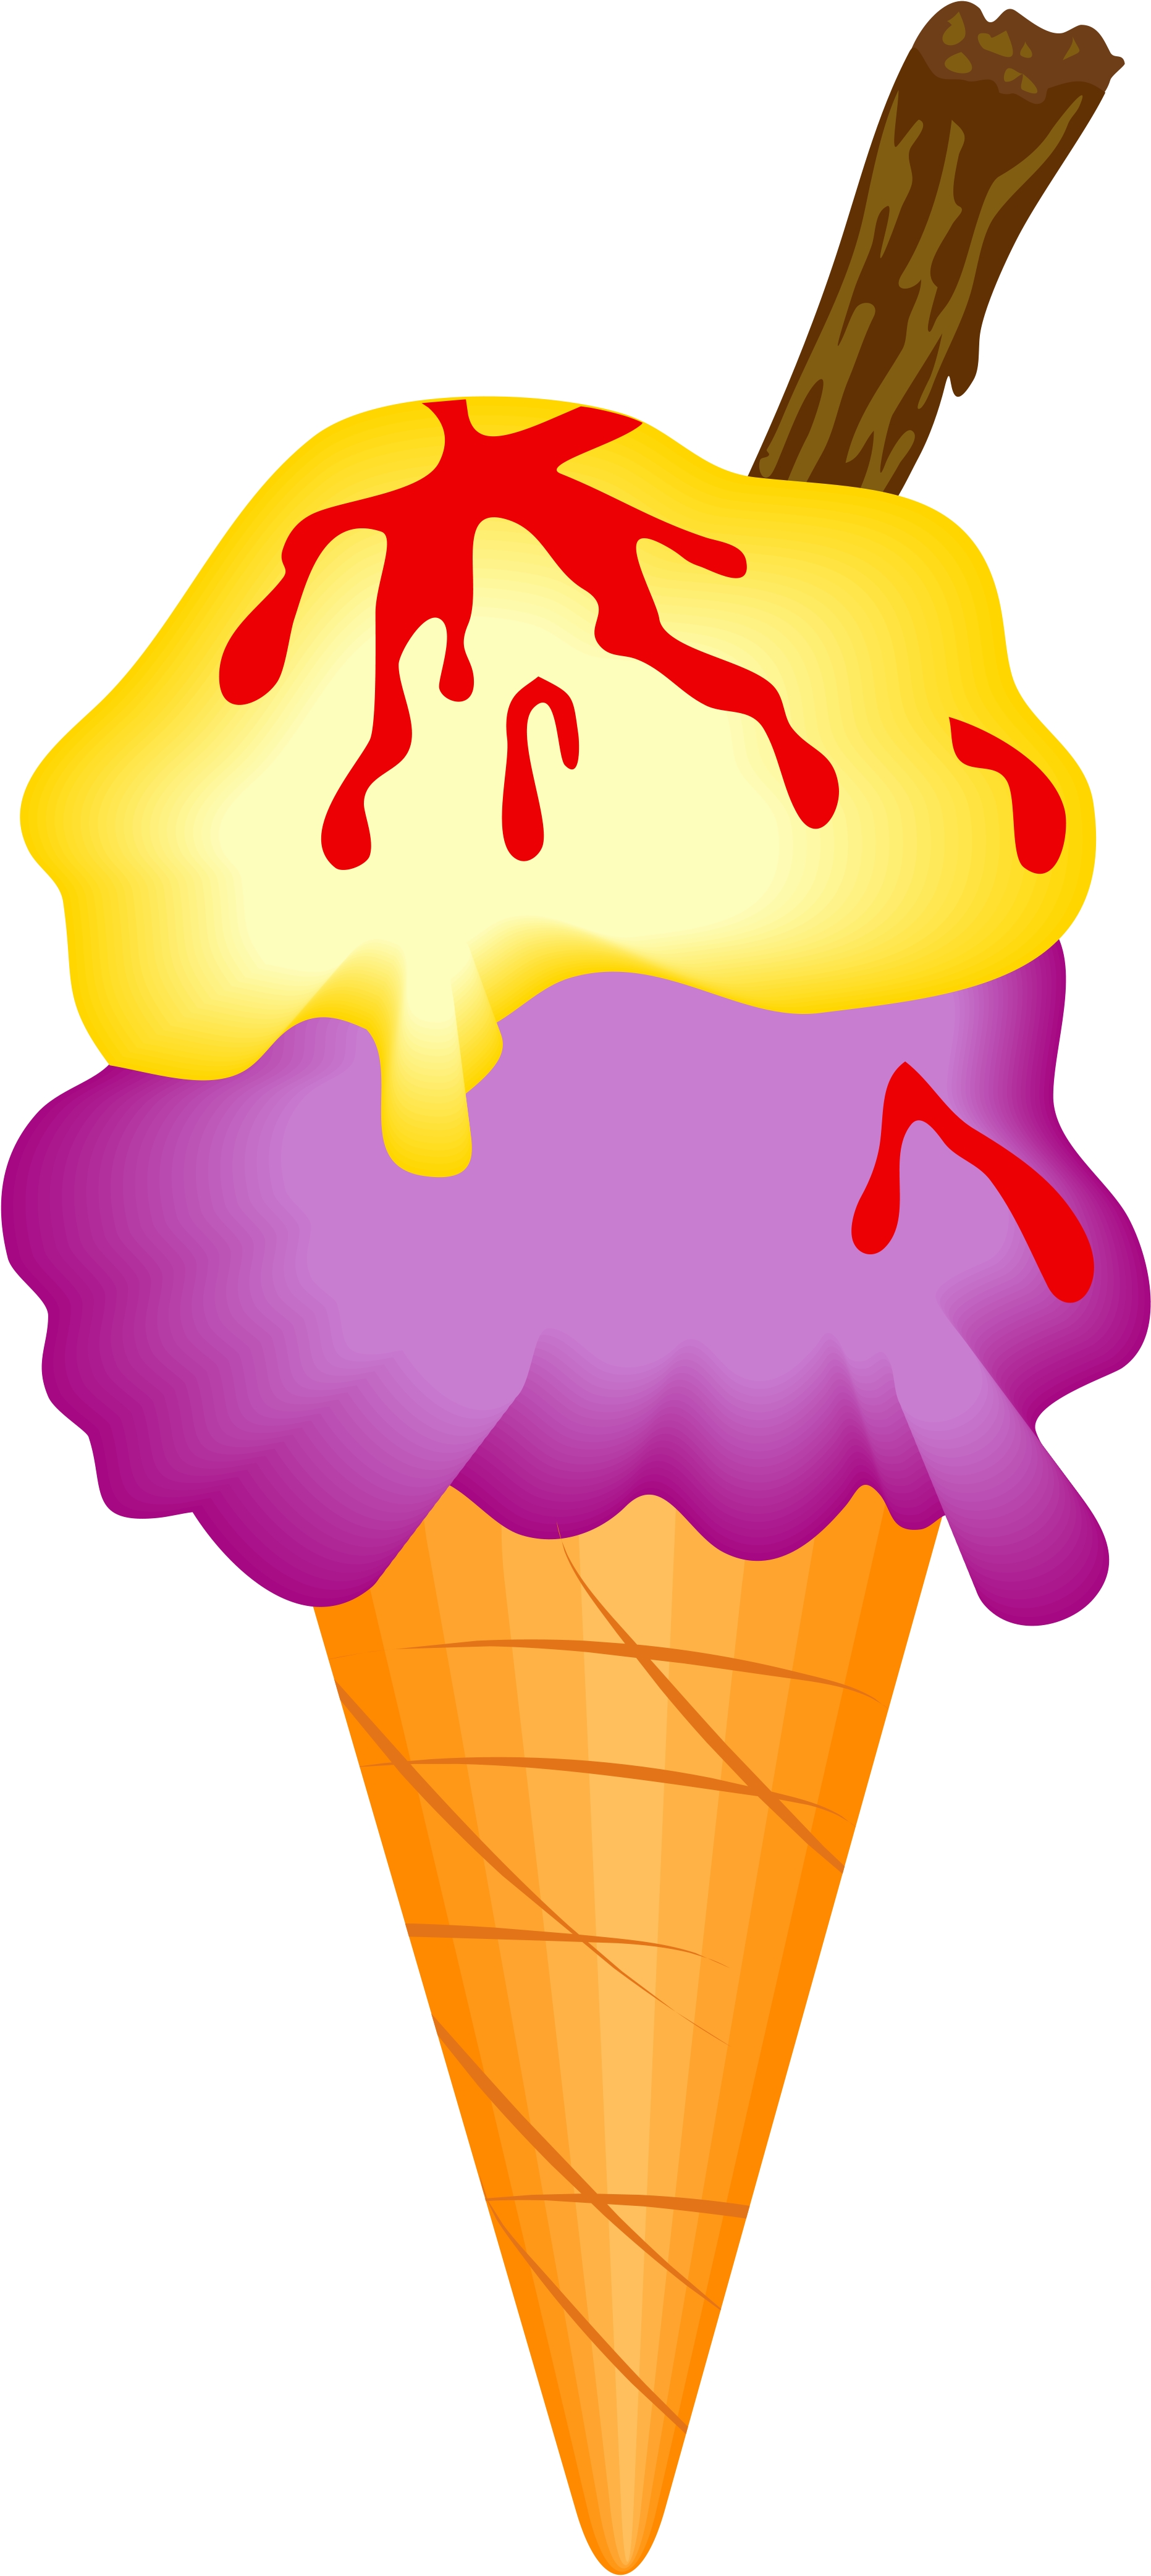 Eis clipart #1, Download drawings